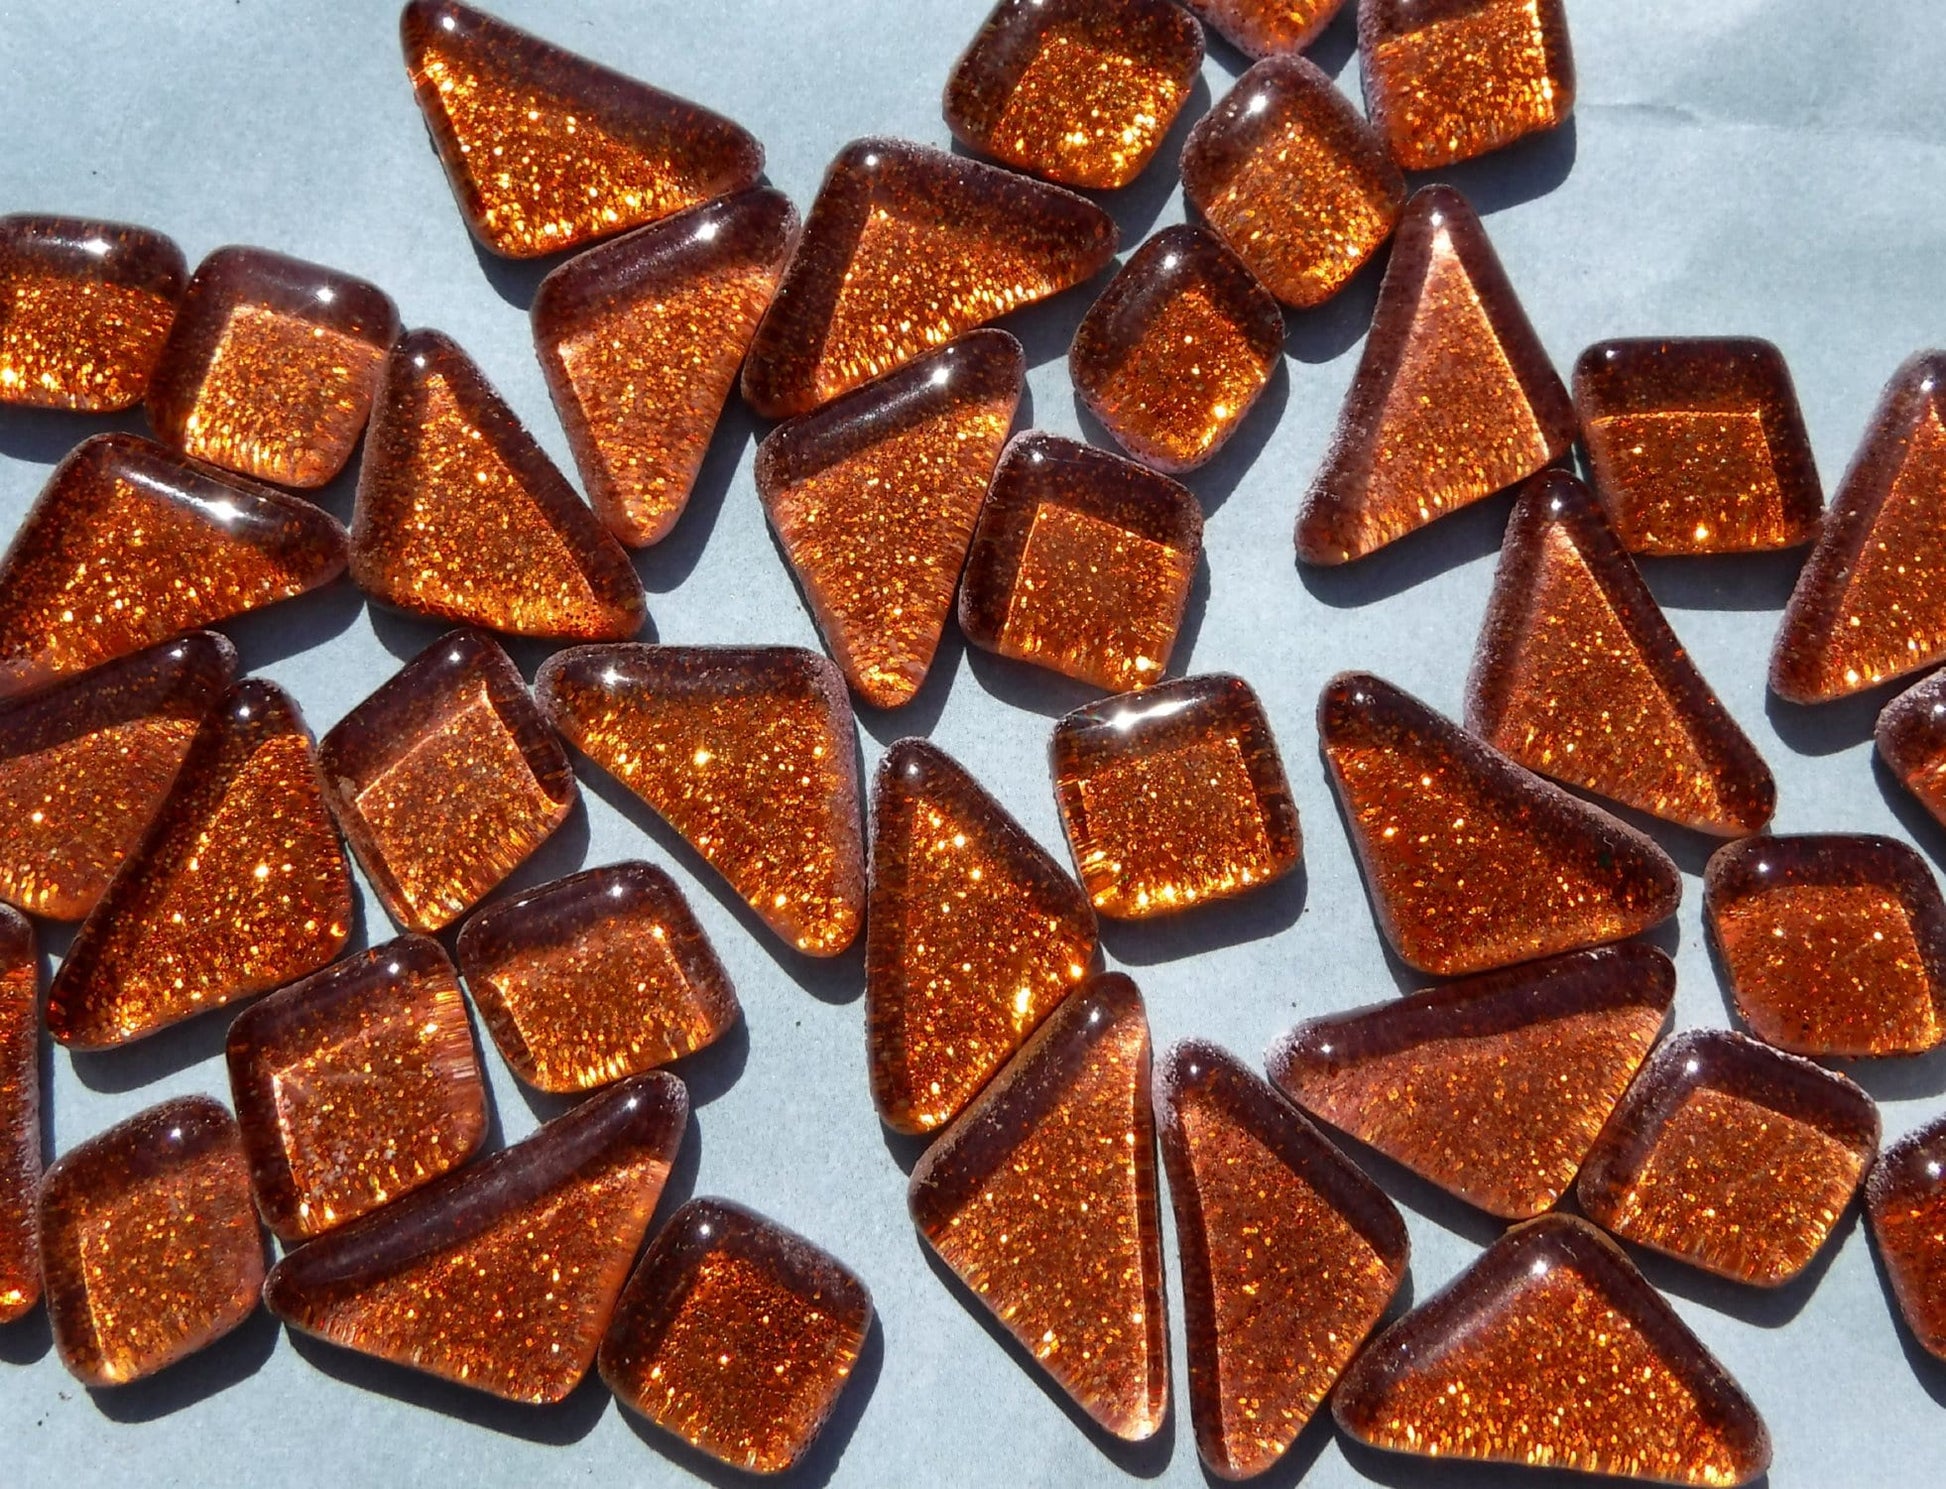 Orange Glitter Puzzle Tiles - 100 grams in Assorted Shapes Glass Mosaic Tiles